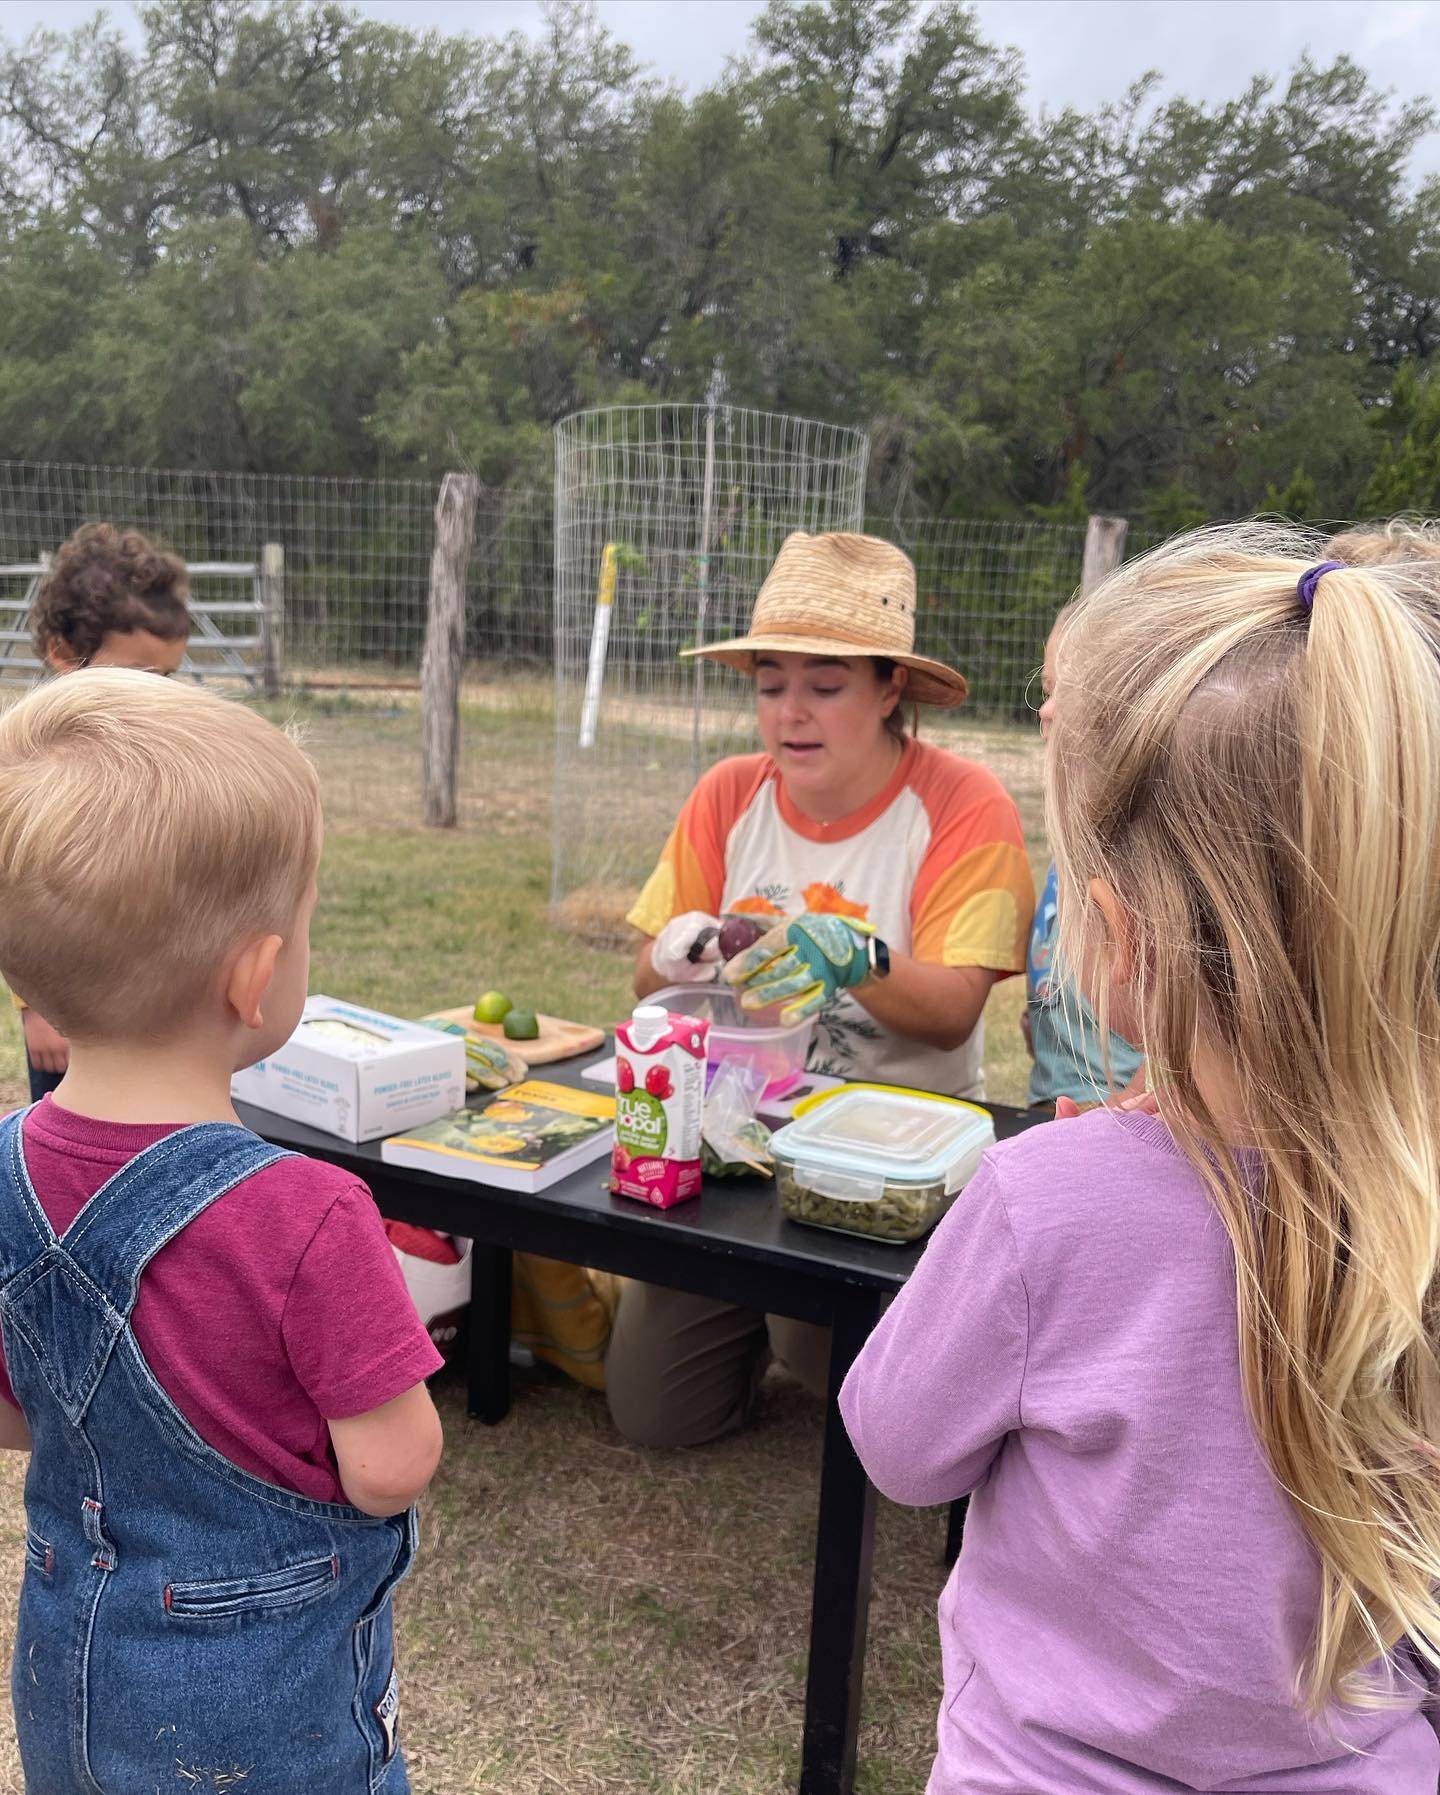  A glimpse into our Nature Class, where our older students did some wild foraging, taste-testing cactus pads (nopales) and prickly pear fruit (tunas) while learning about safe harvesting and the nutritional benefits of plants. 